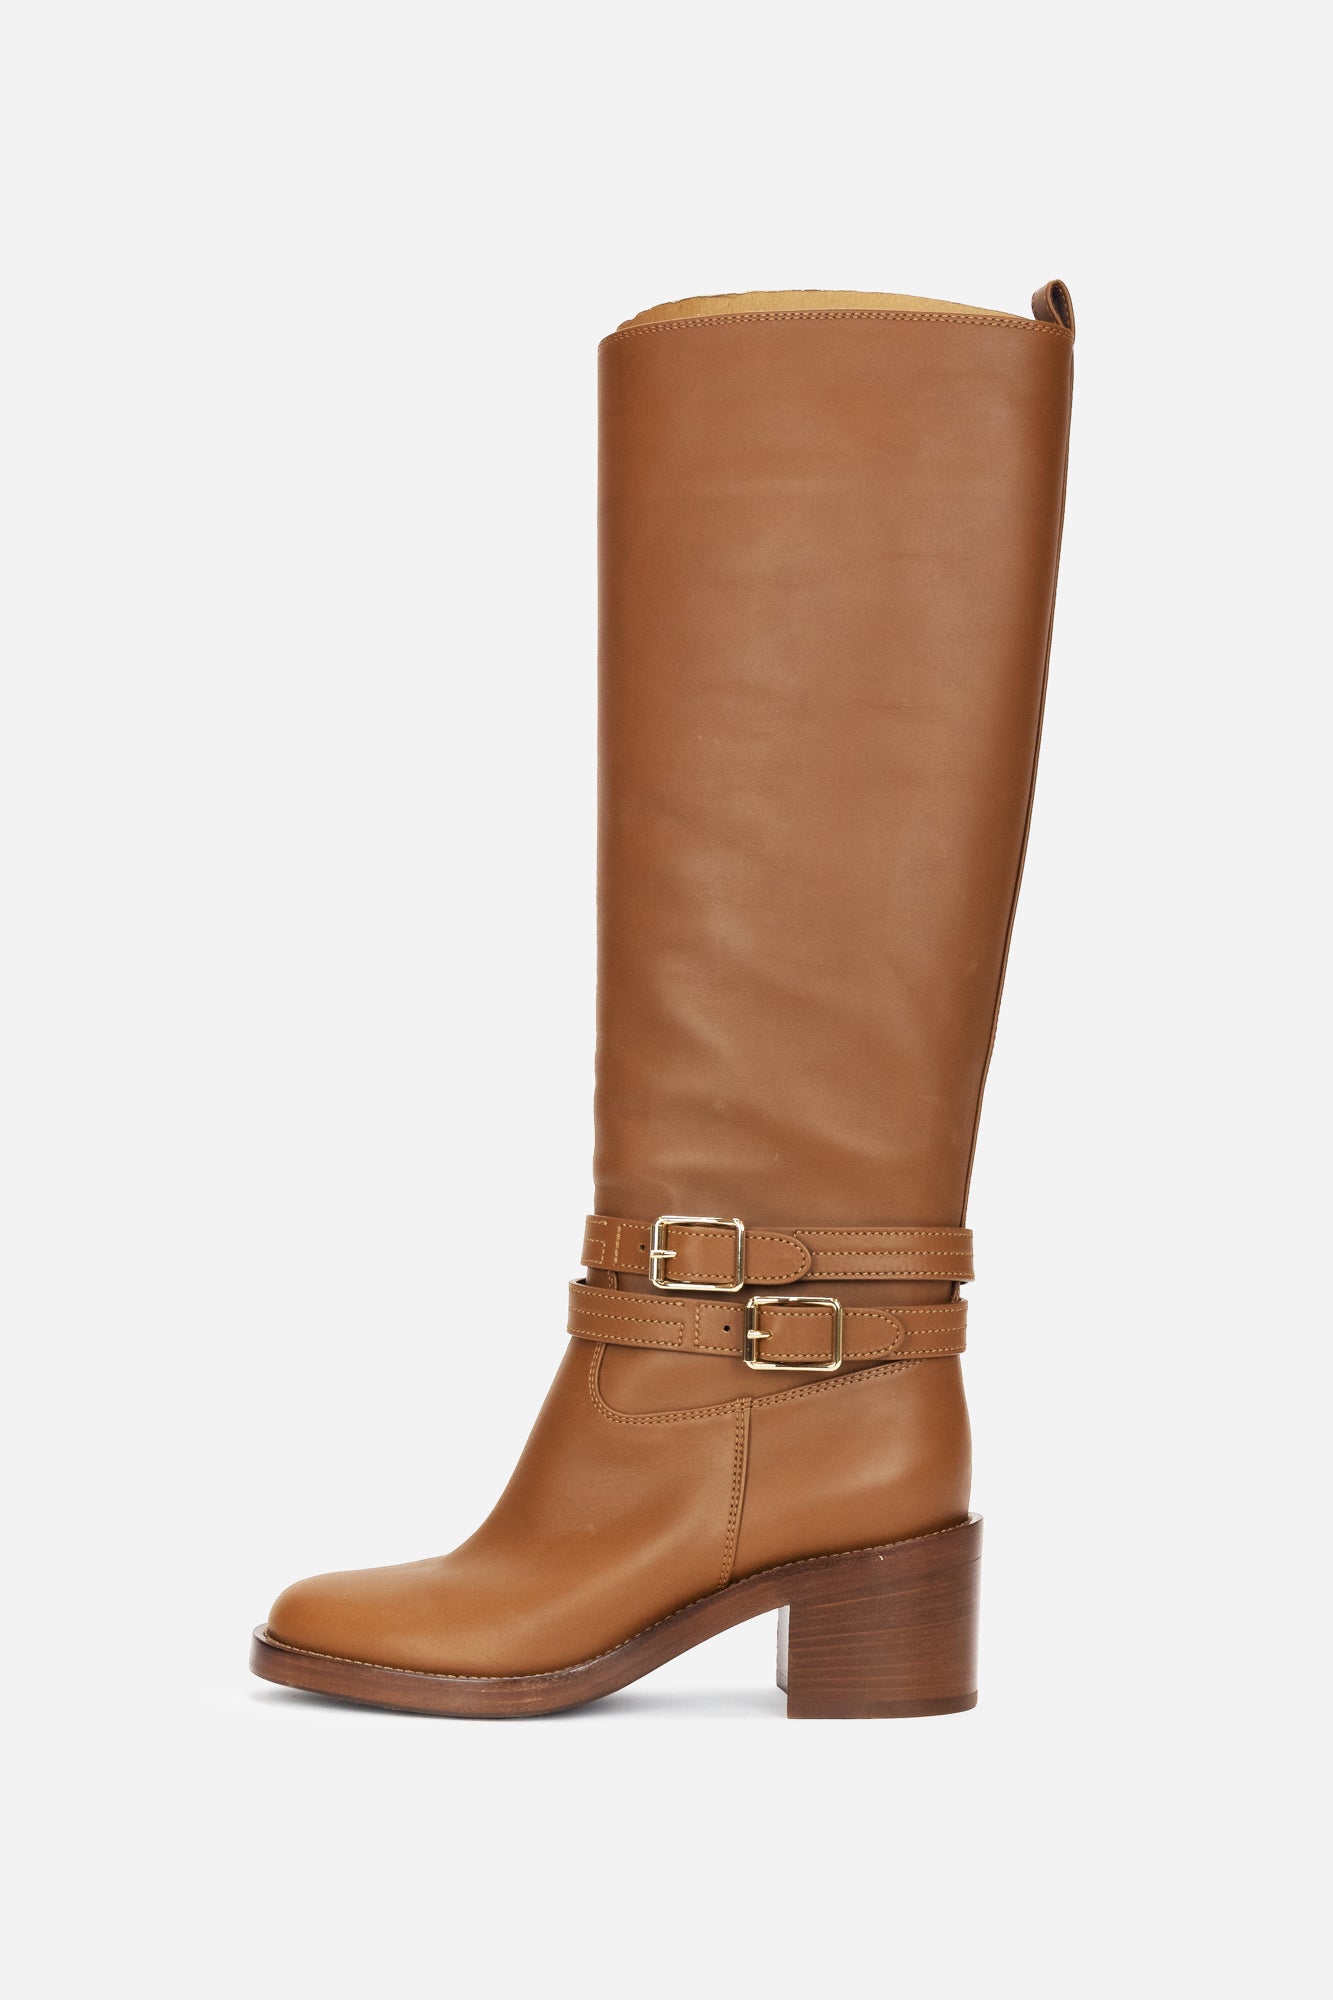 Brown Leather Riding Boots with Buckle Details